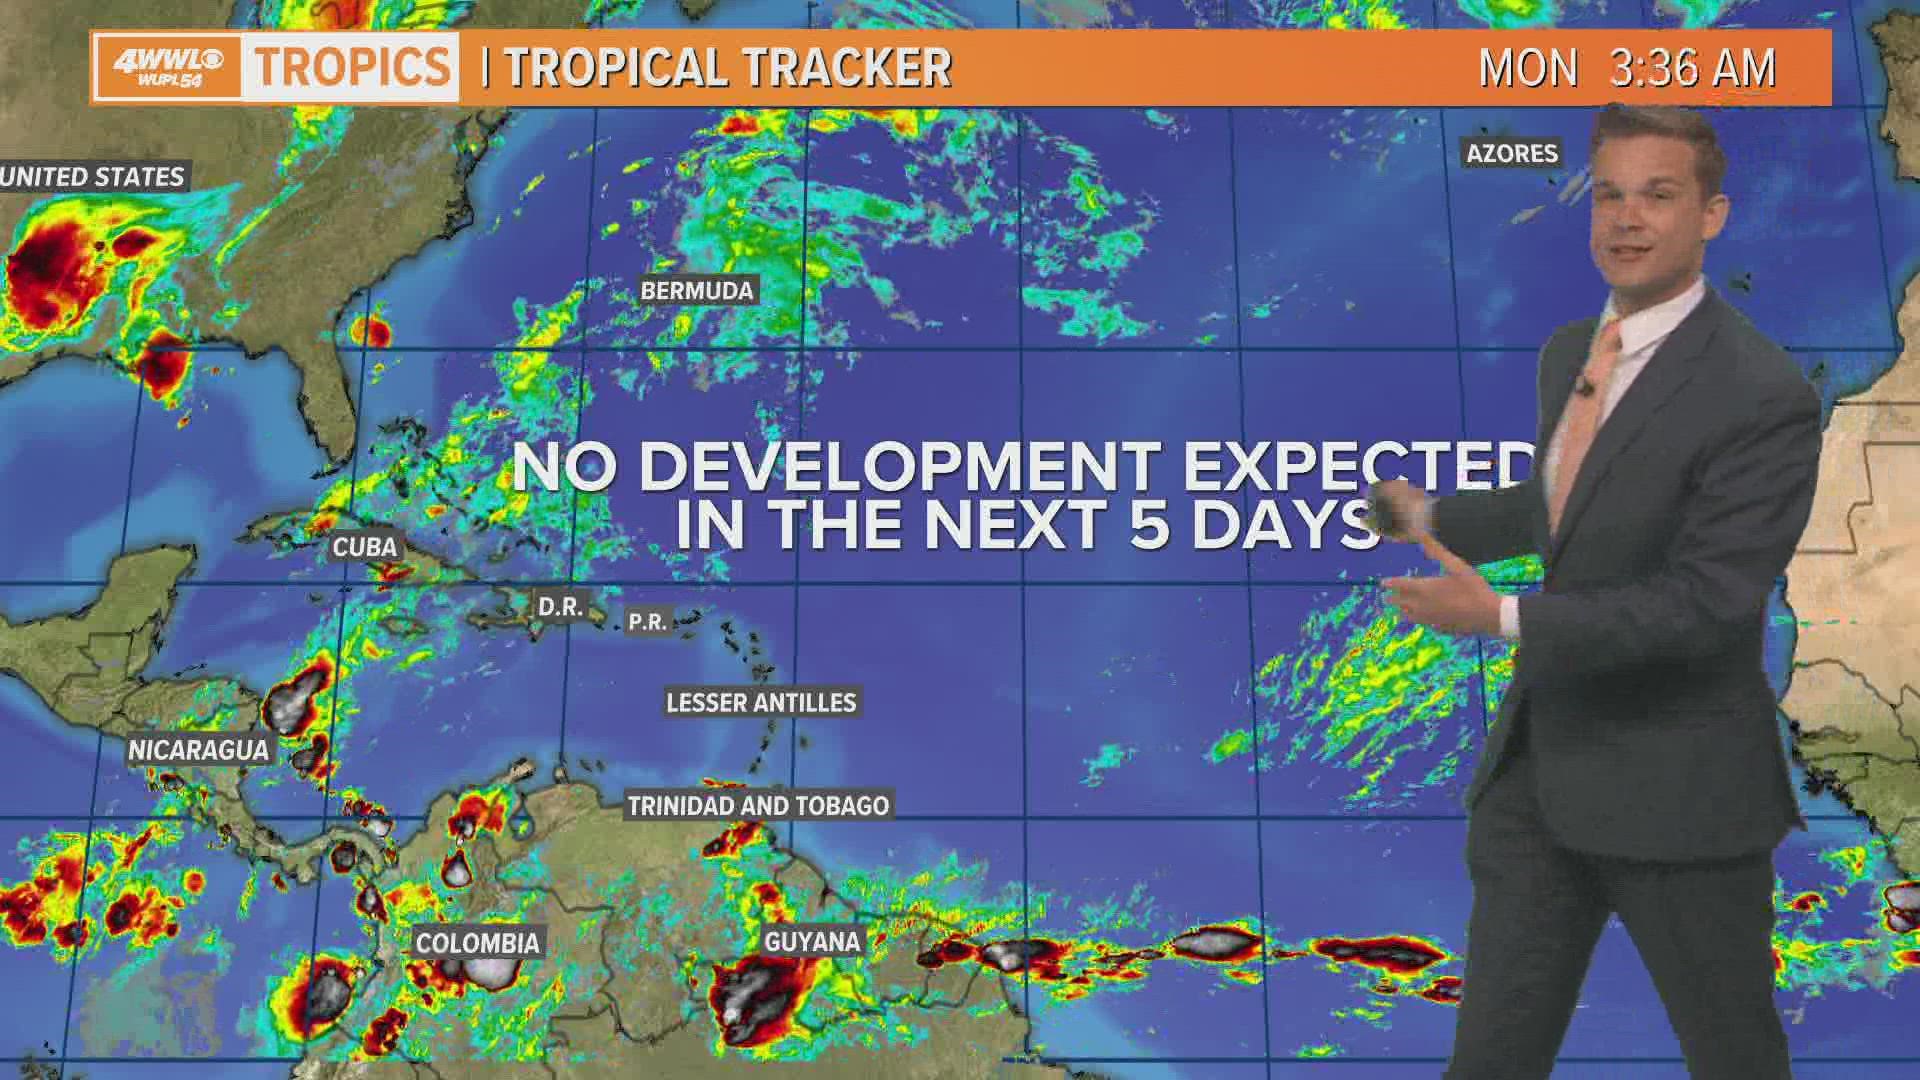 This week looks pretty quiet in the tropics, but by this weekend we could see gradual development near Central America.